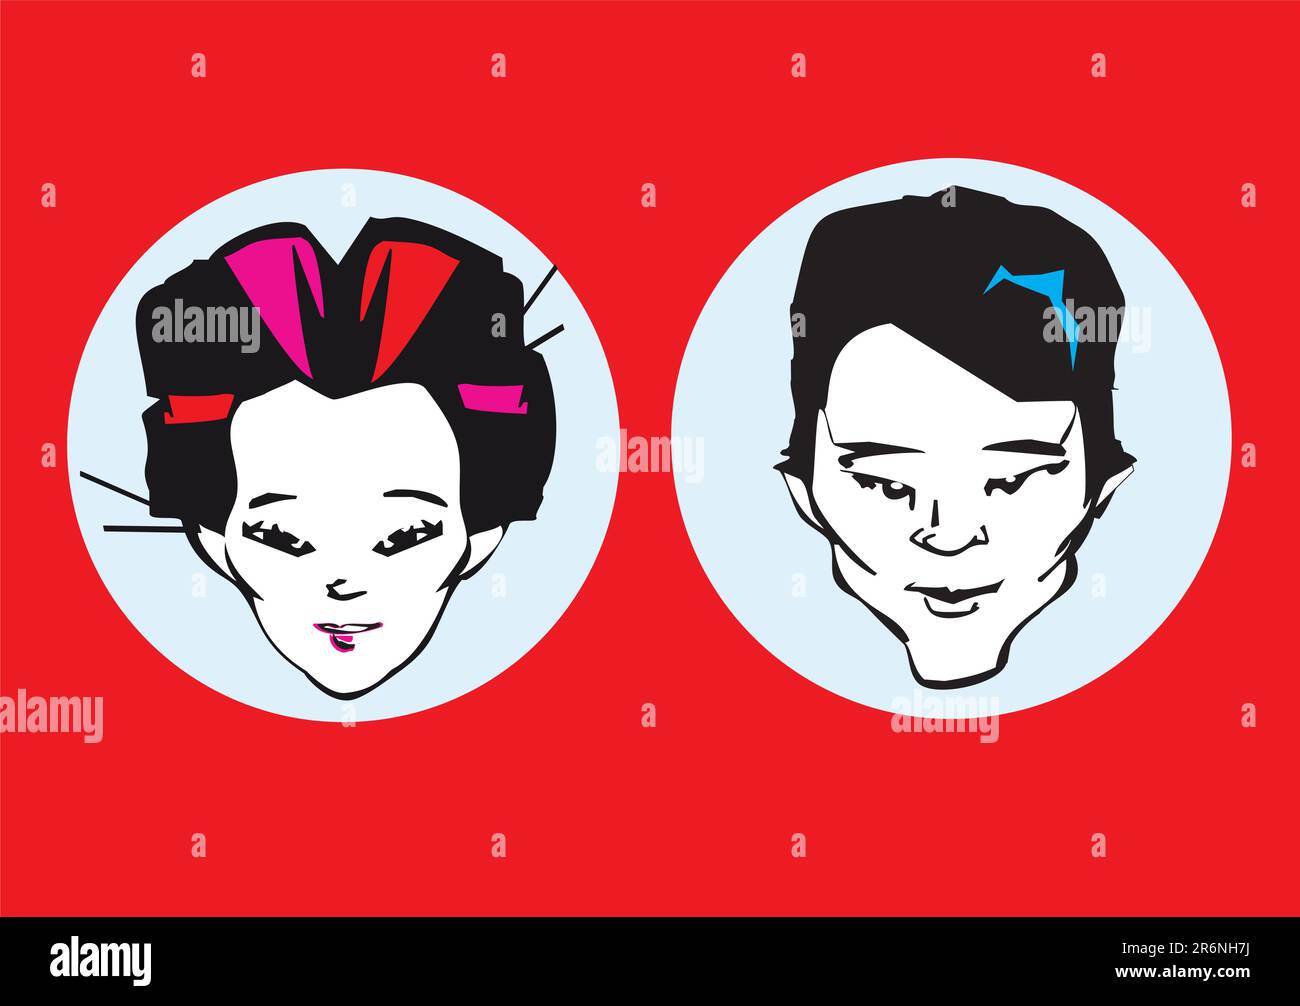 portraits / faces of woman and man - cartoons style Stock Vector